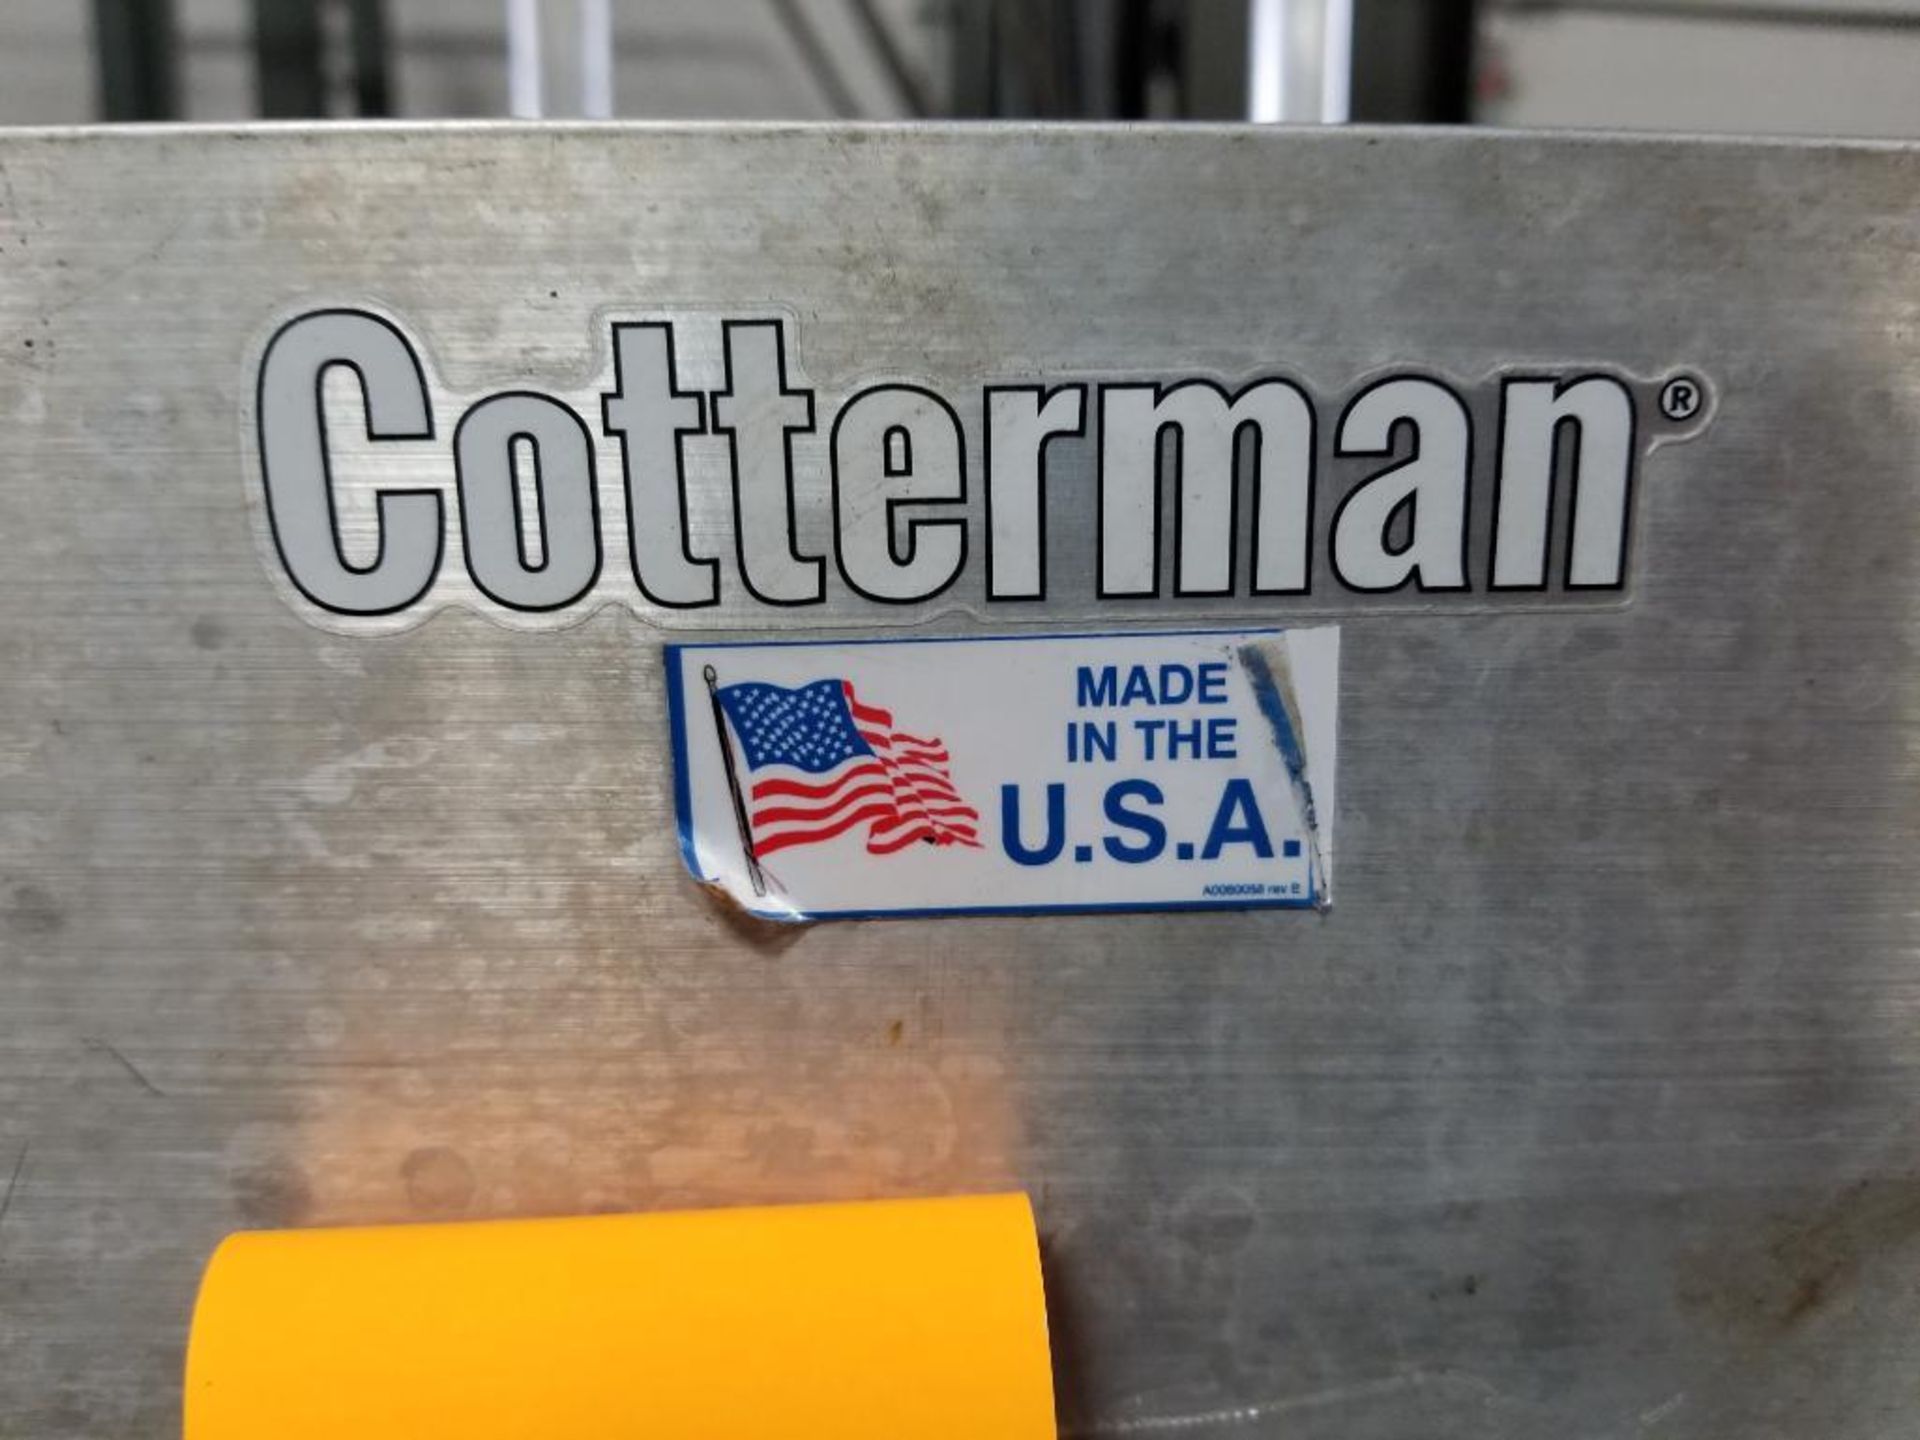 Cotterman aluminum crossover bridge step set. 120" long x 30" wide x 99" tall with rail. - Image 3 of 8